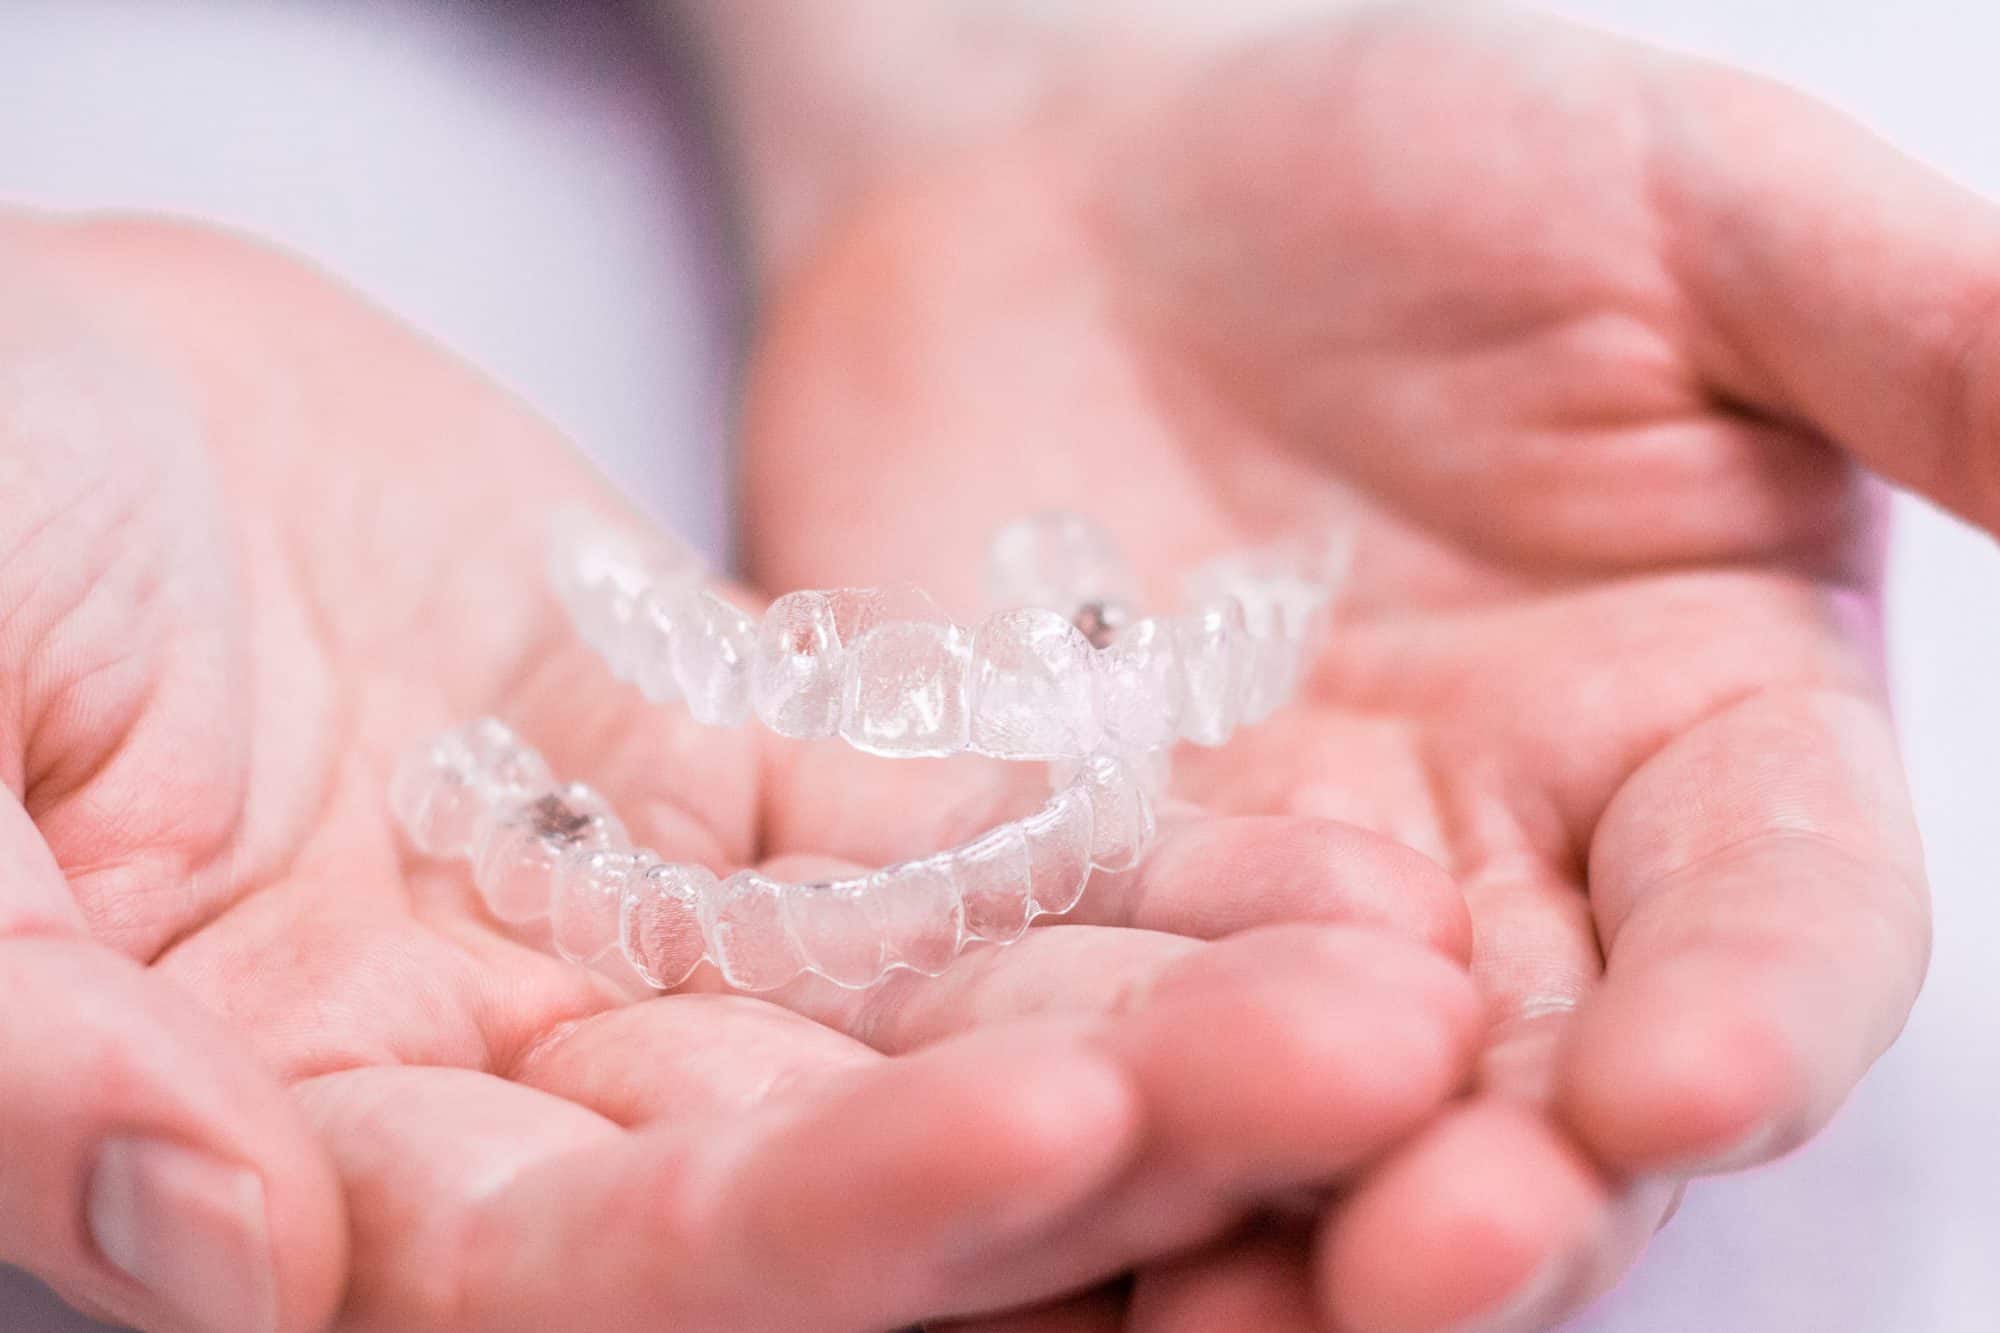 Hands holding two Invisalign trays